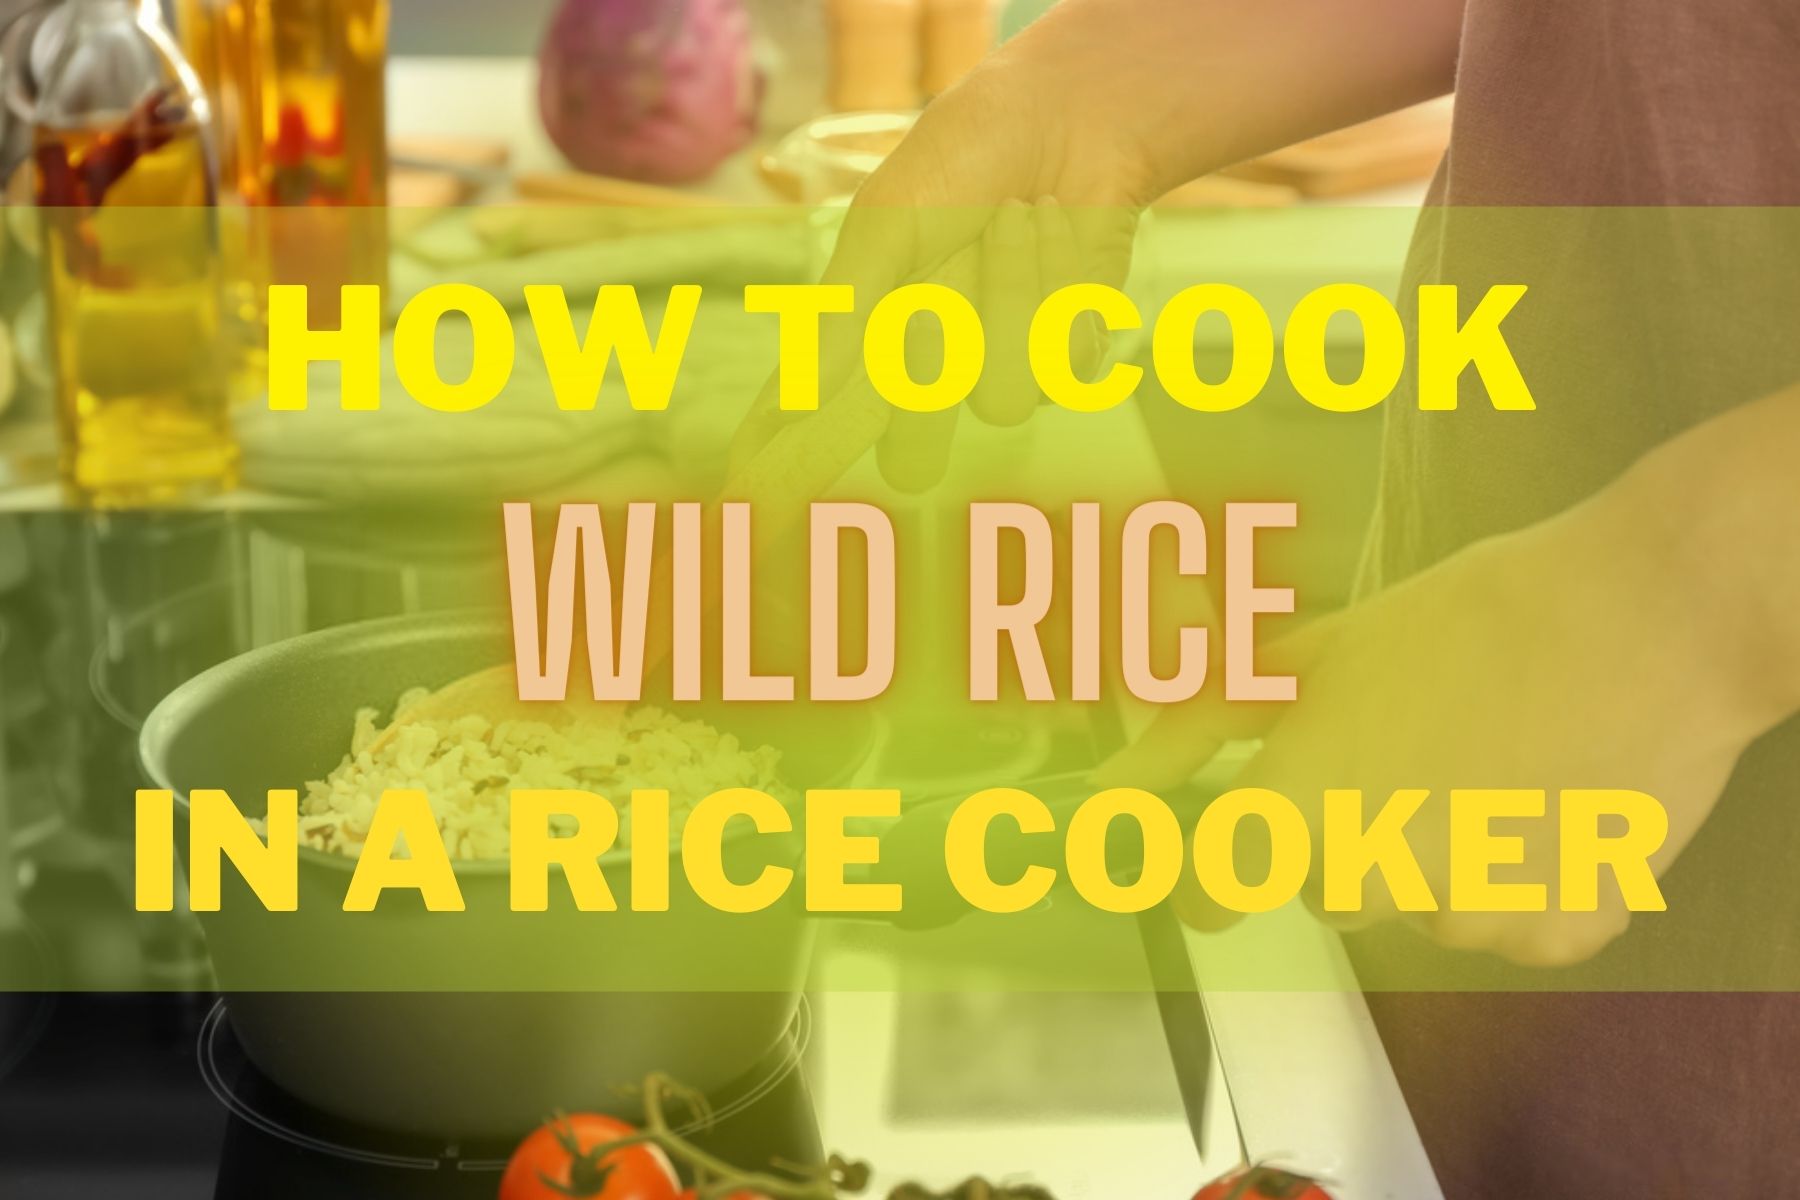 How To Cook Wild Rice In A Rice Cooker